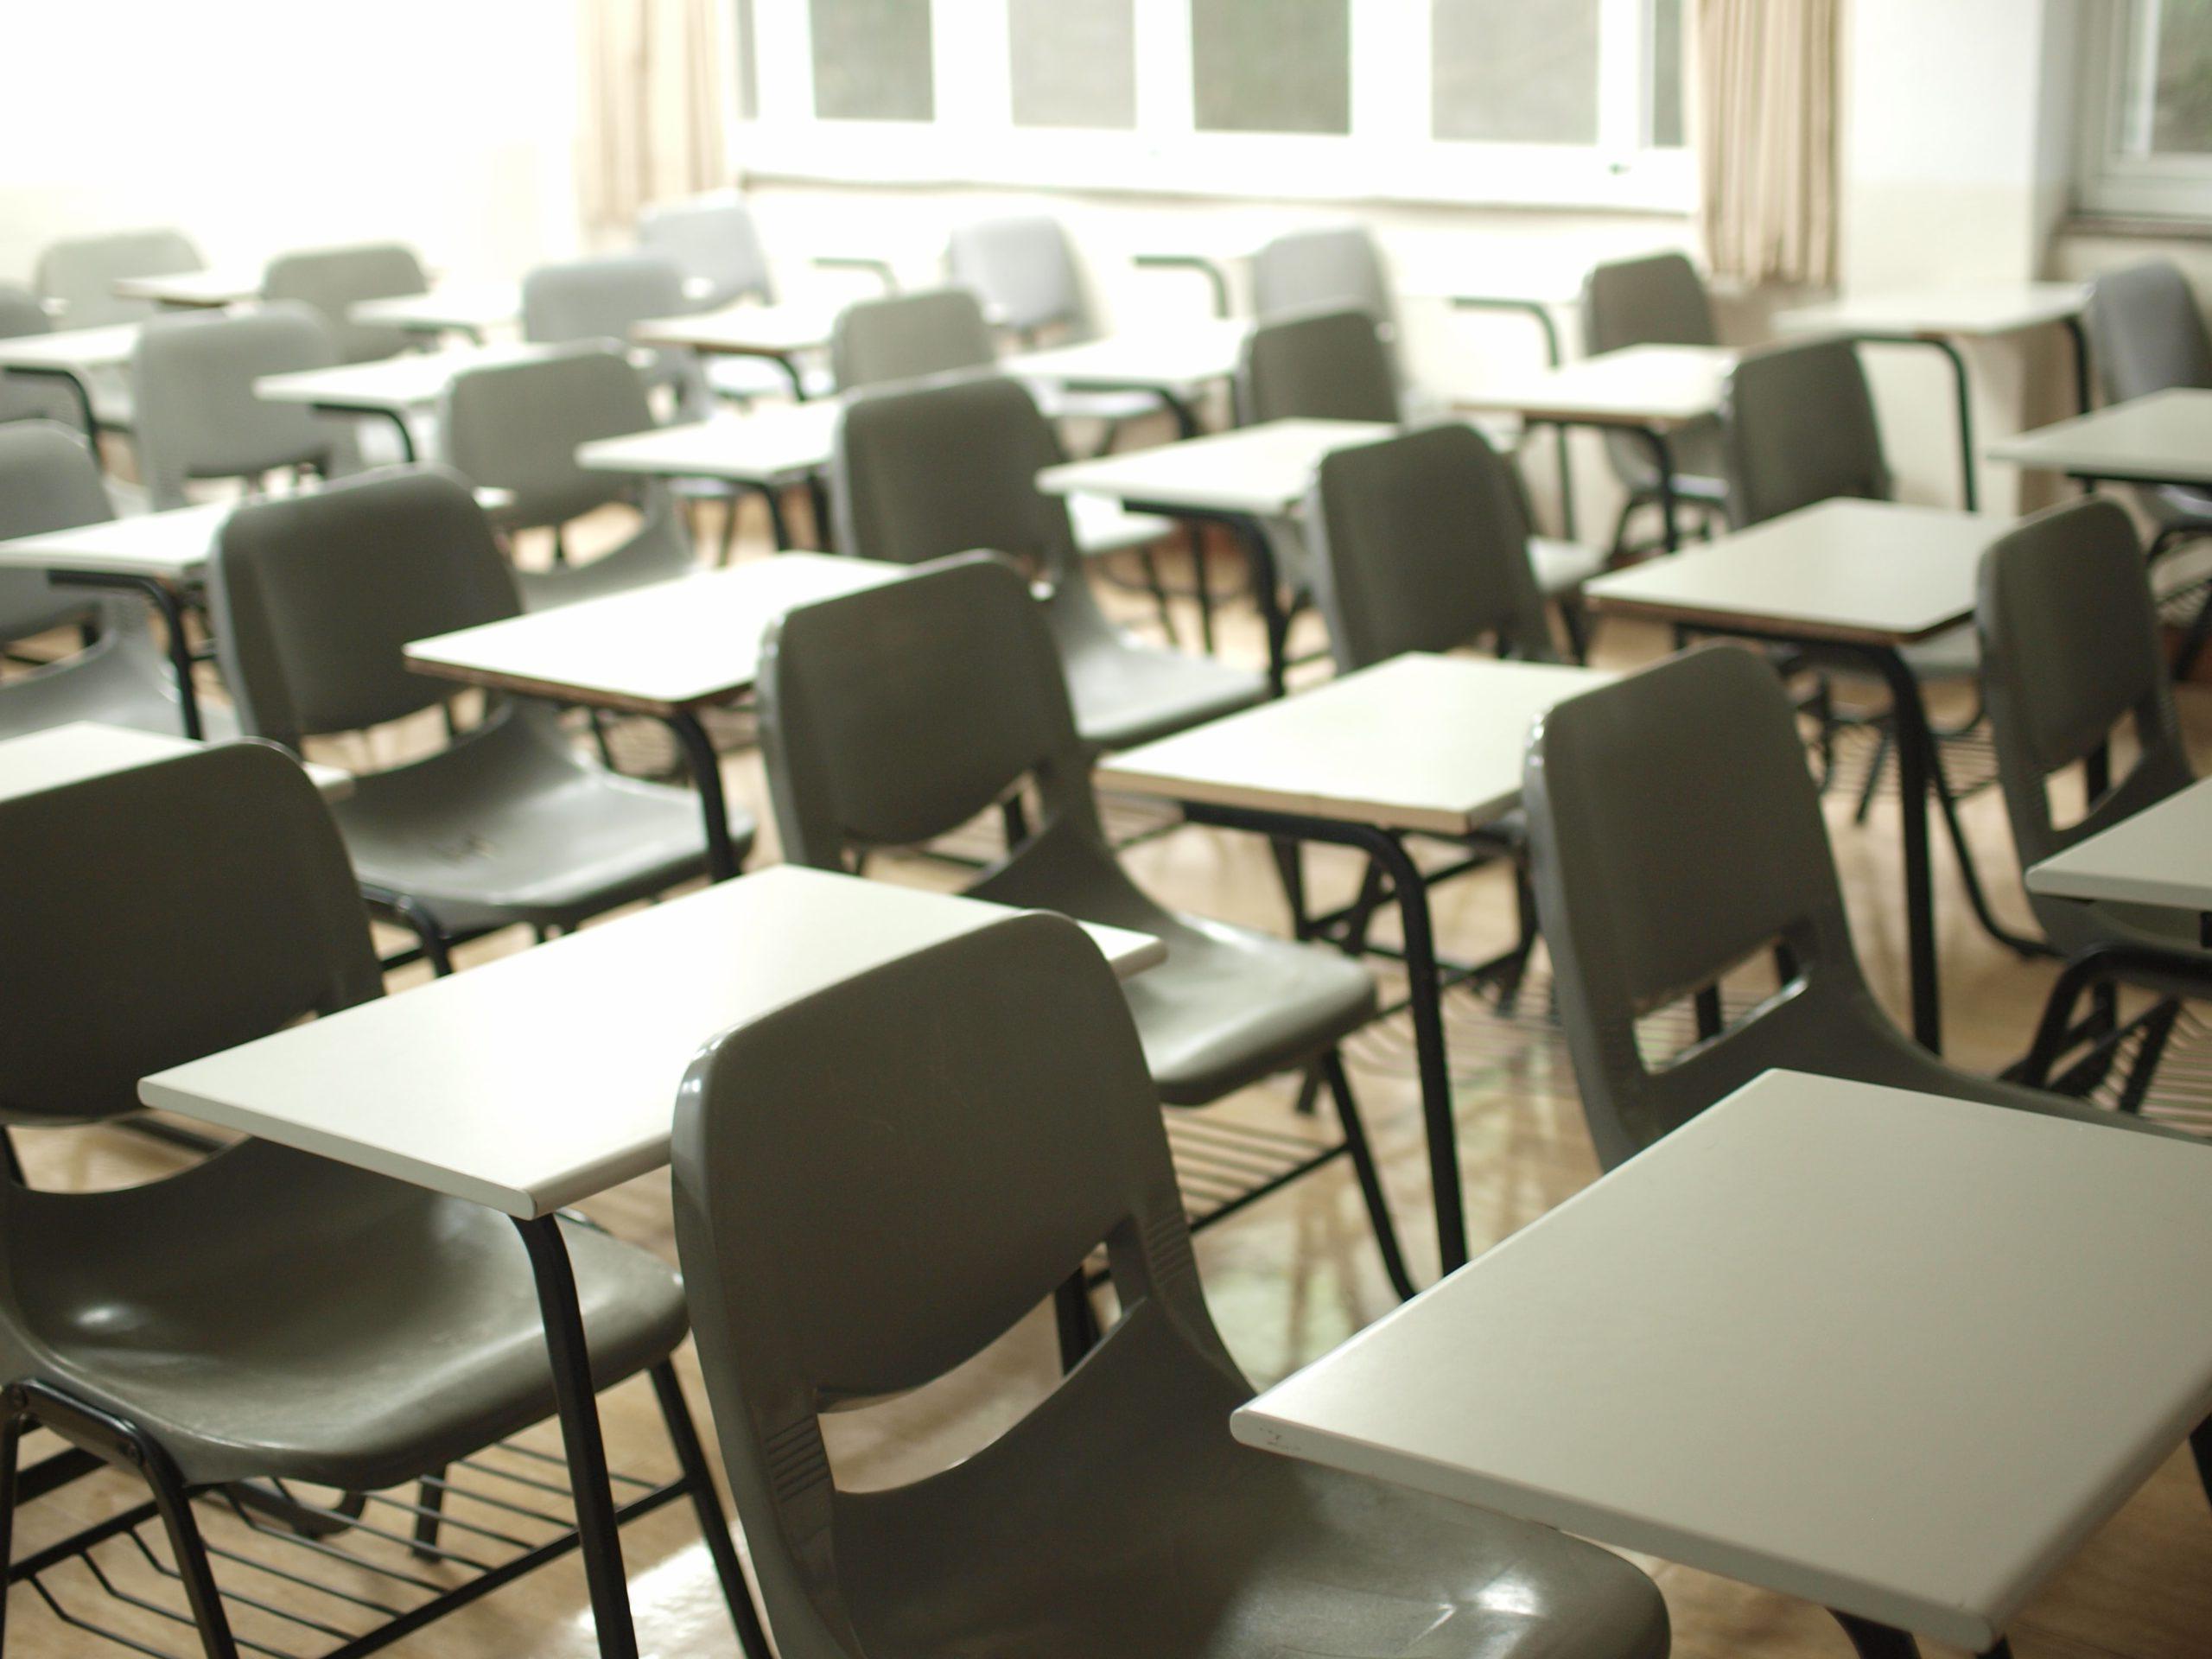 Rows of empty desks and chairs in a classroom